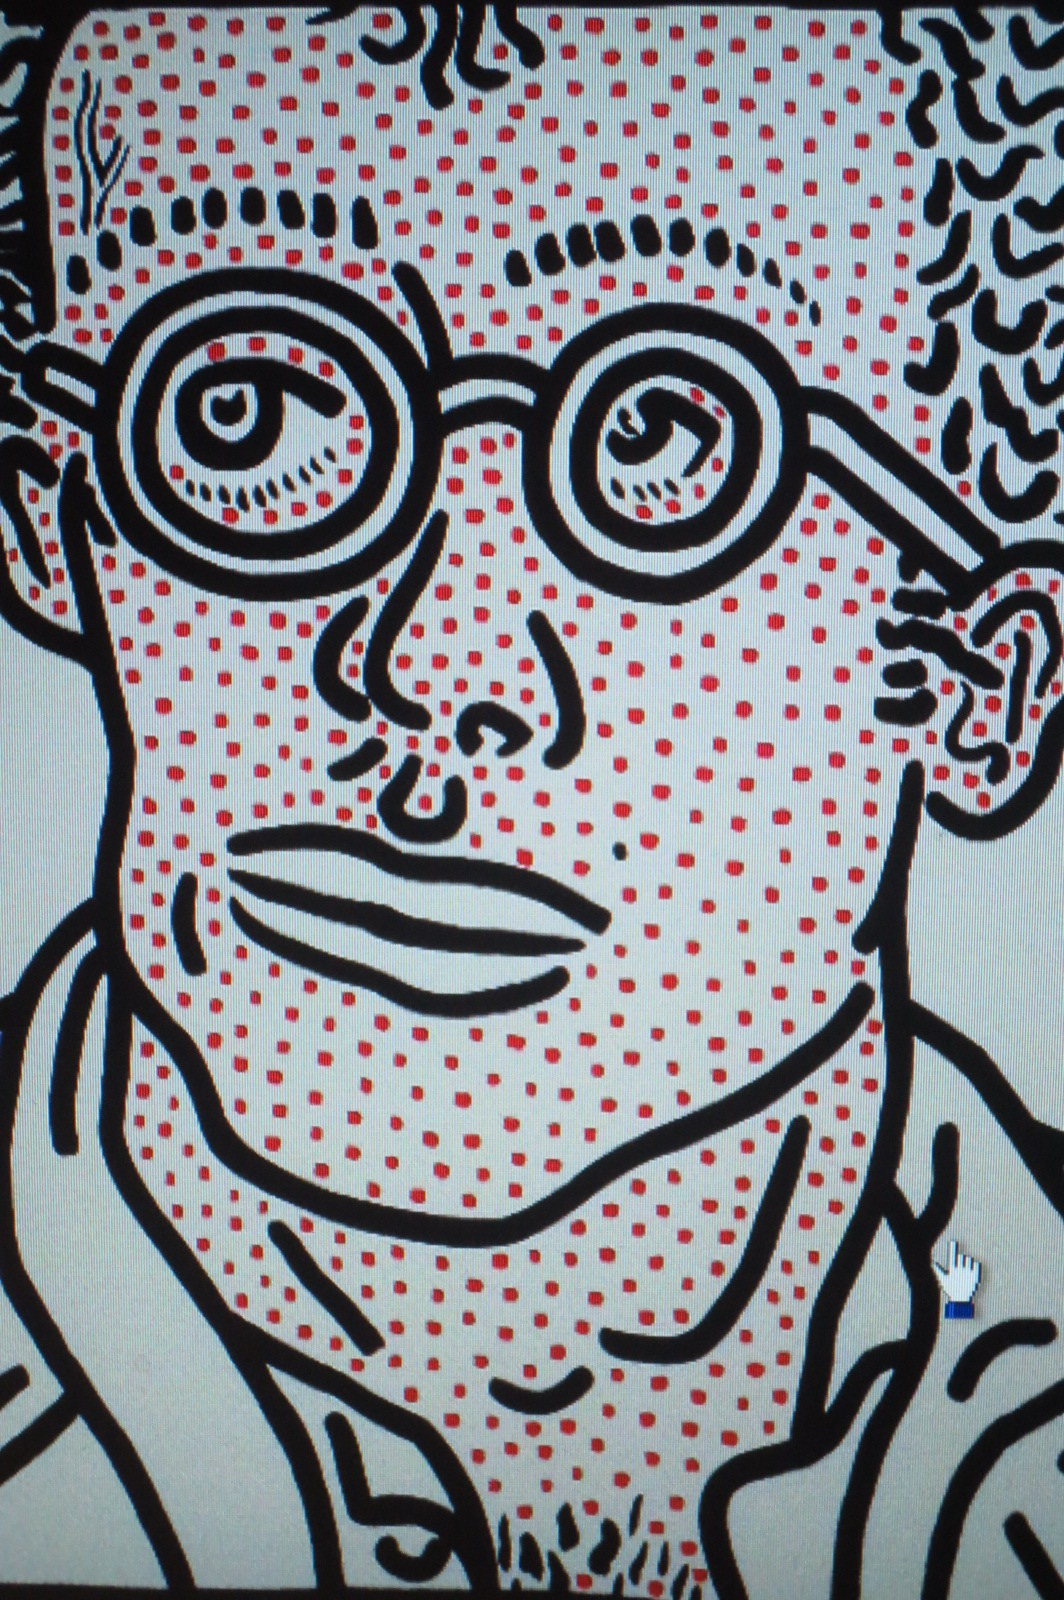 Impressions Sur L&amp;#039;Art: Exposition : &amp;quot; Keith Haring, The à Peintre Keith Haring